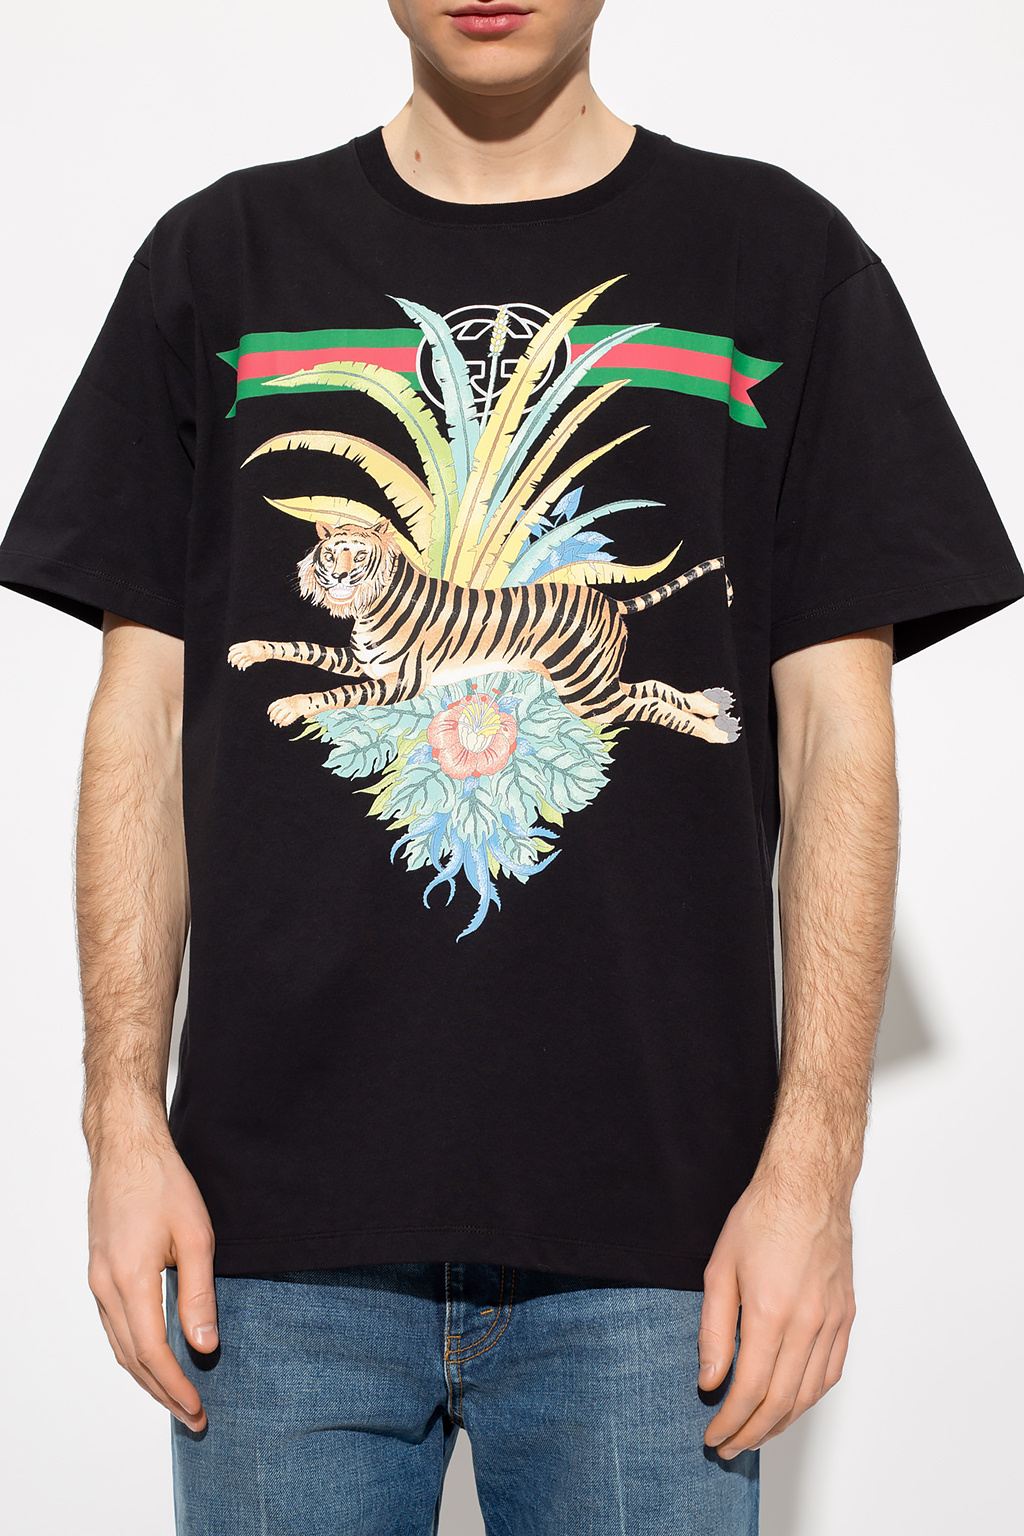 Gucci Printed T-shirt from the ‘Gucci Tiger’ collection